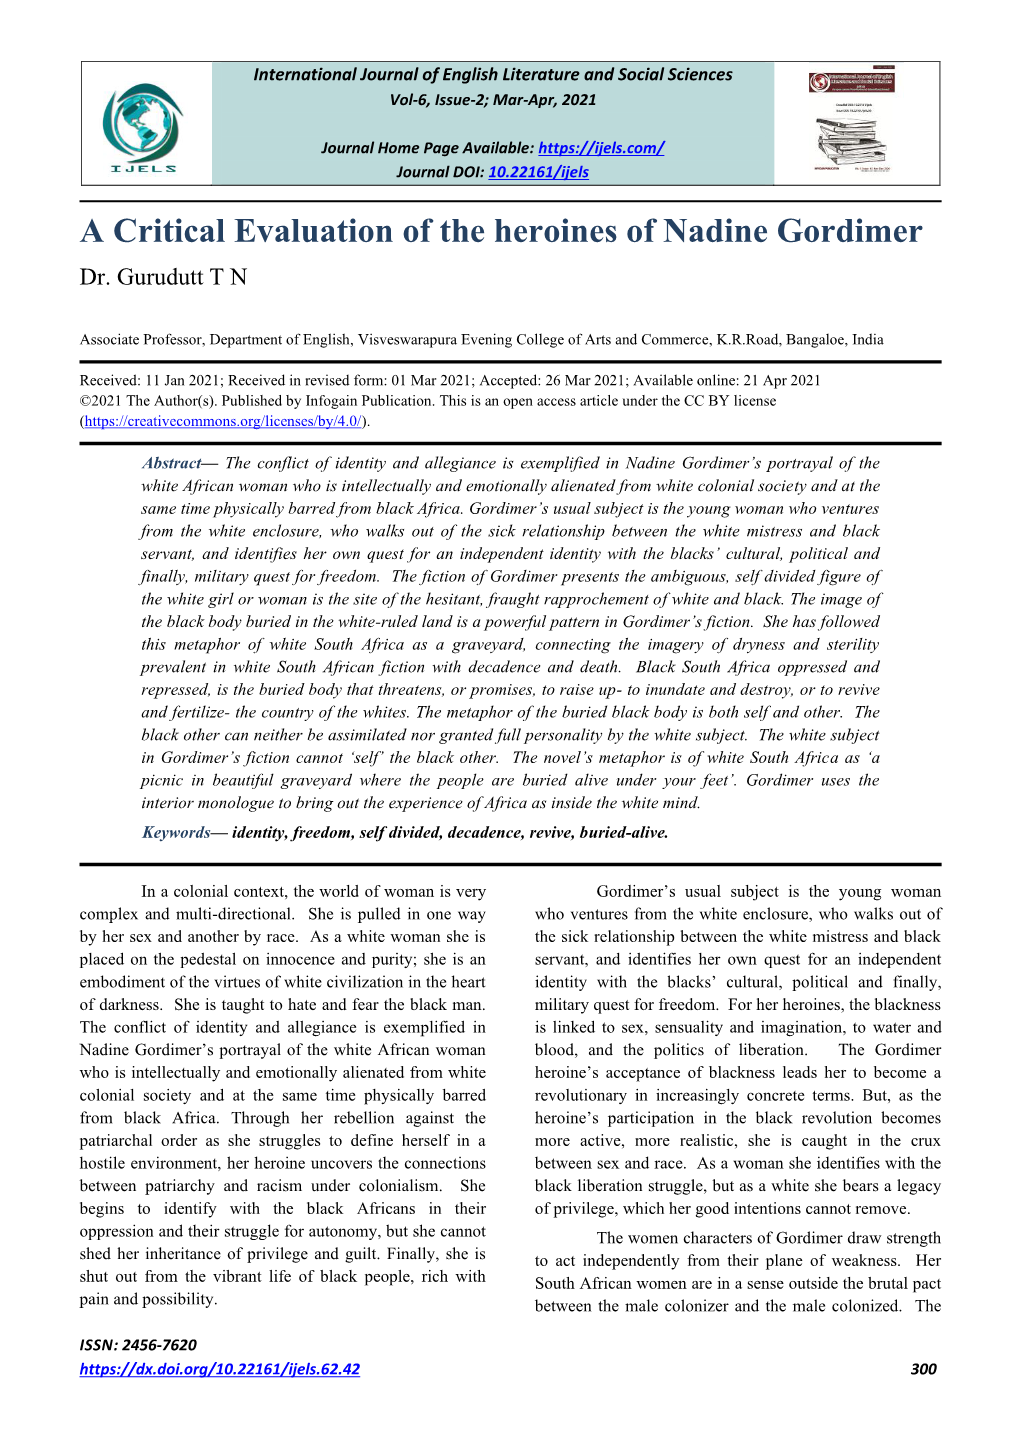 A Critical Evaluation of the Heroines of Nadine Gordimer Dr